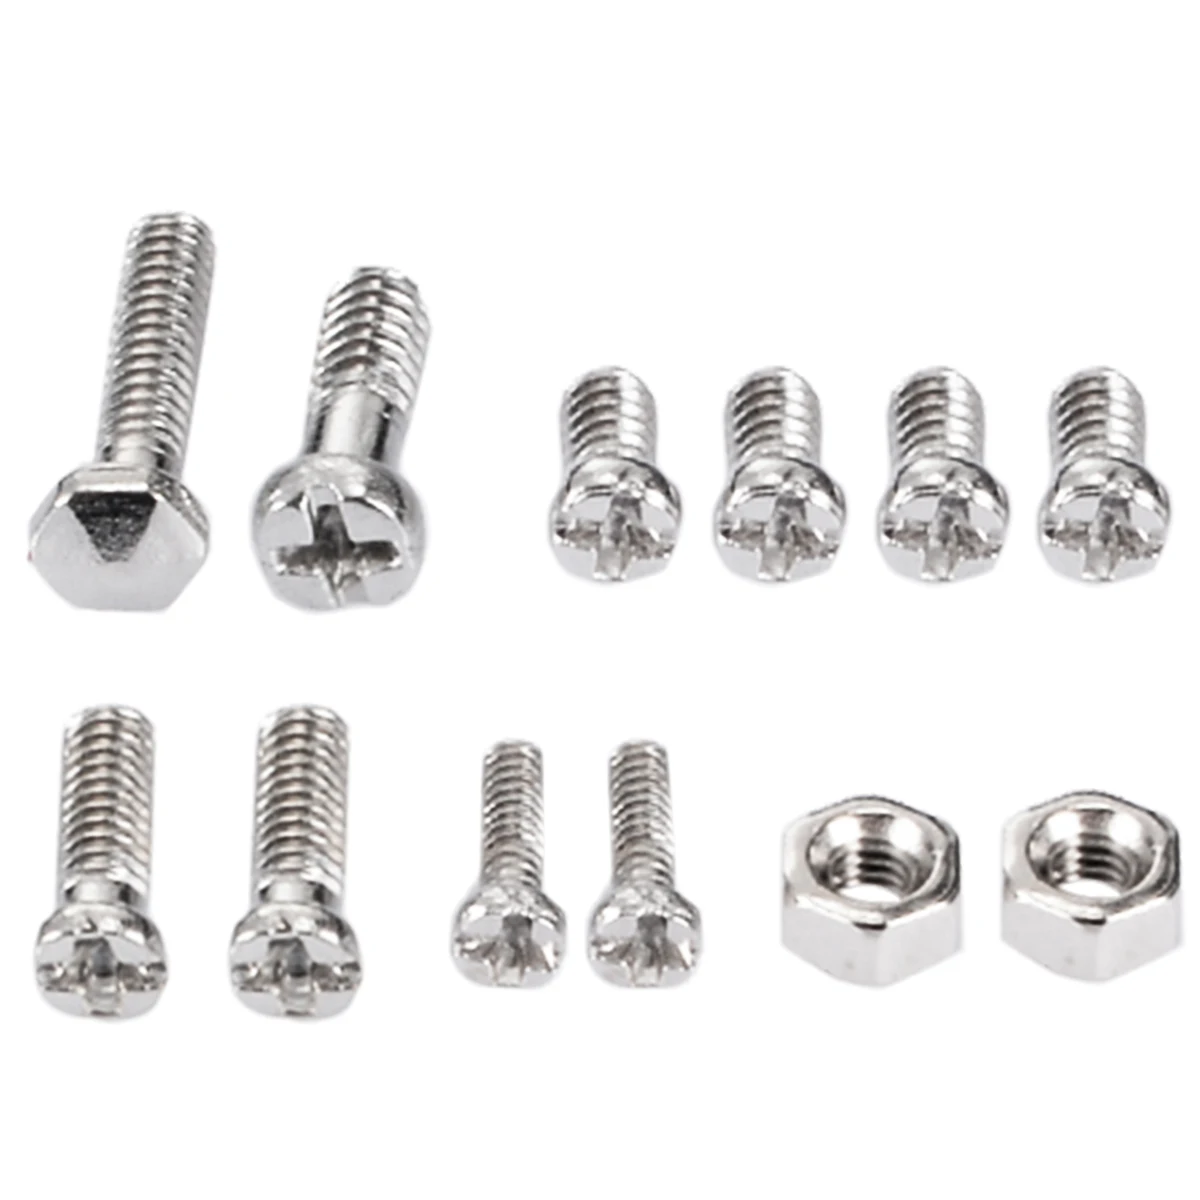 M1.4 Pan head Machine screws with nuts Assortment Kit 600 pcs And a screwdriver 